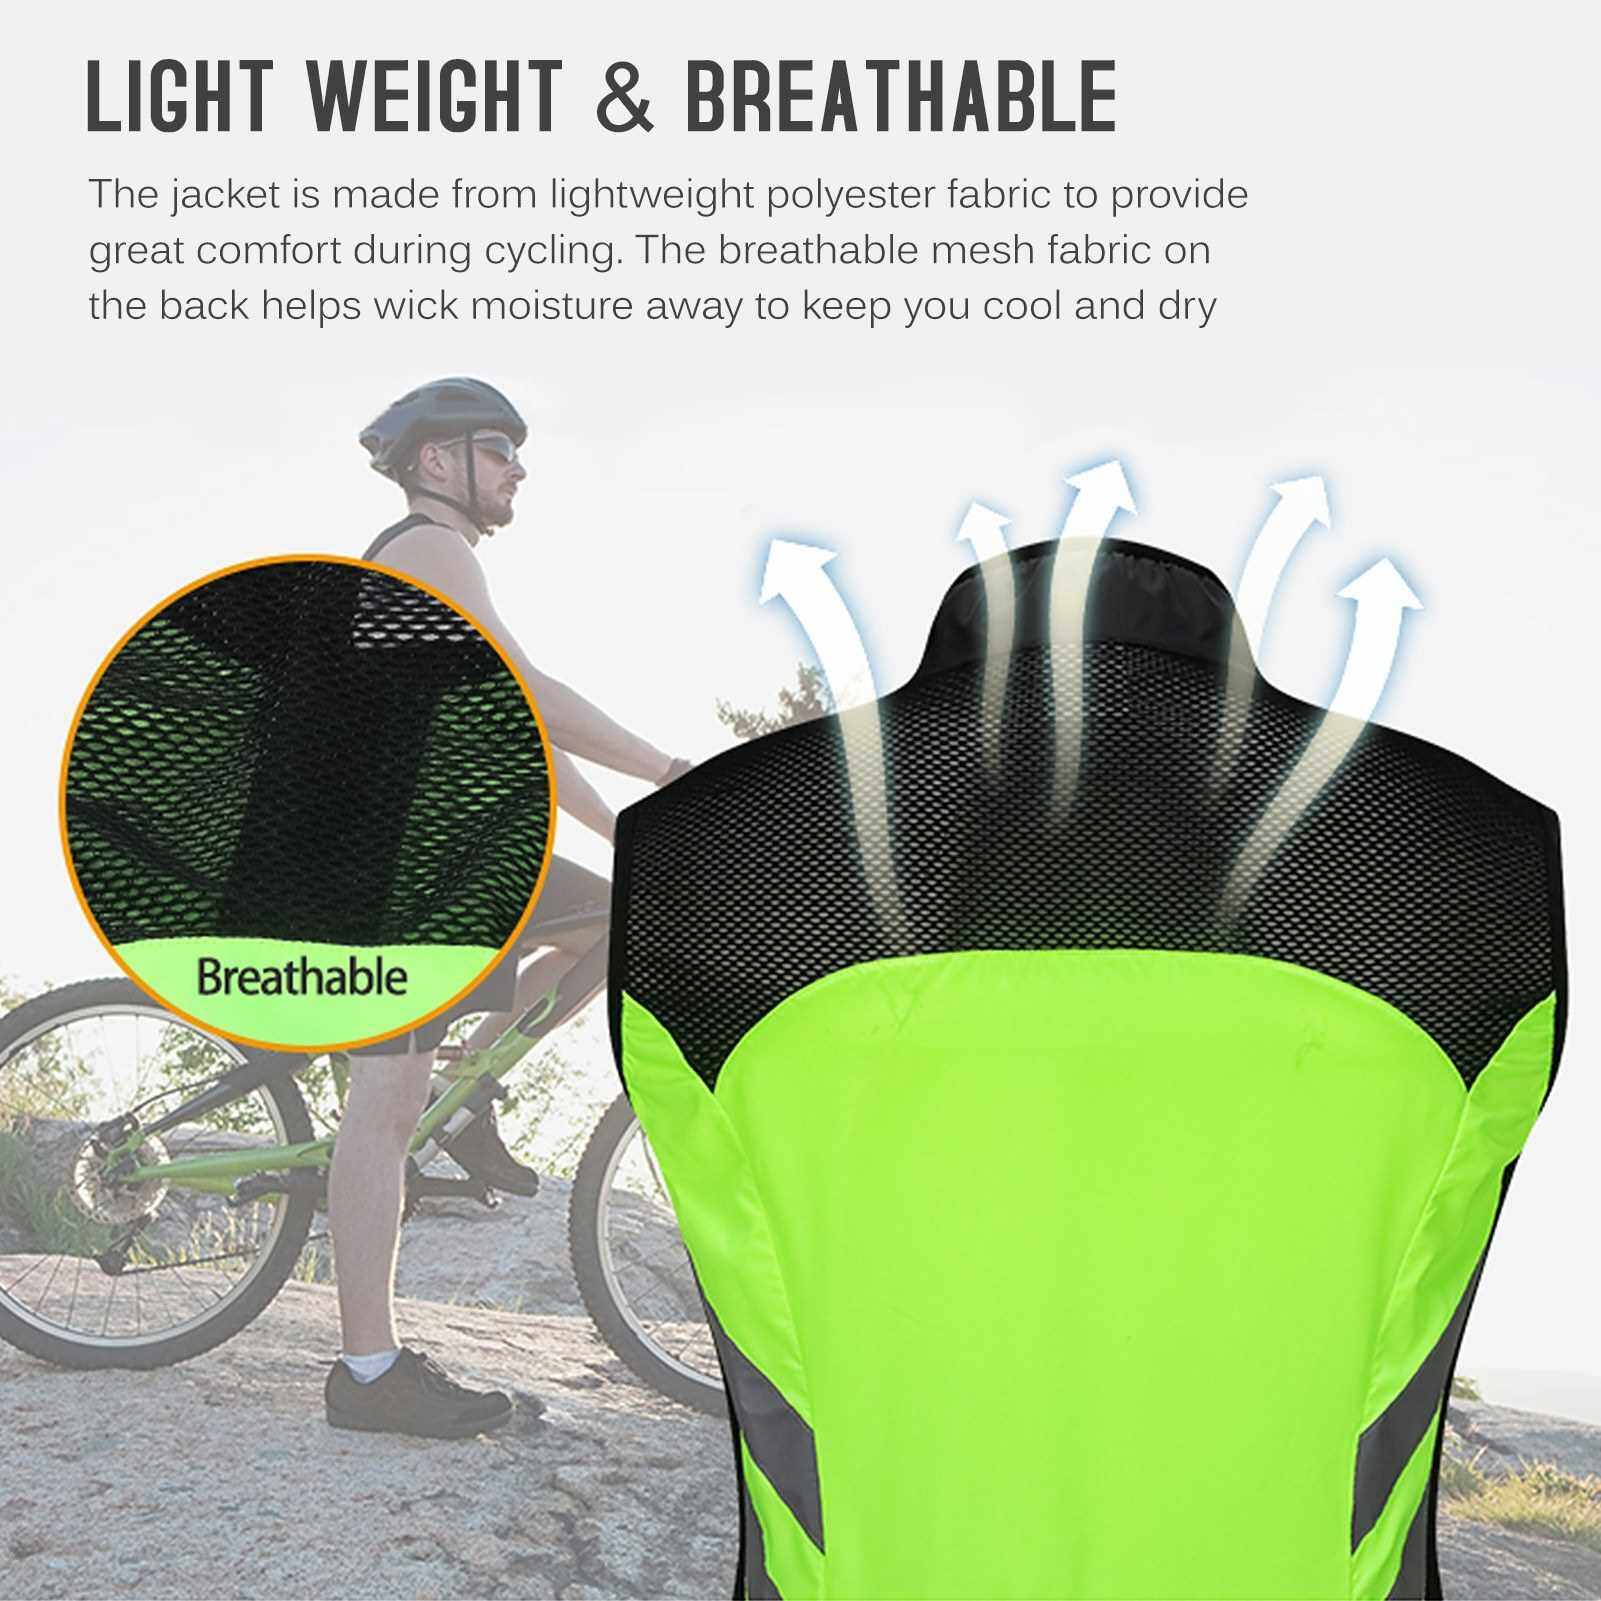 Best Selling Men Cycling Vest Foldable Quick Dry Breathable Reflective Sports Safety Bike Vest for Riding Running Jogging Hiking (Black)